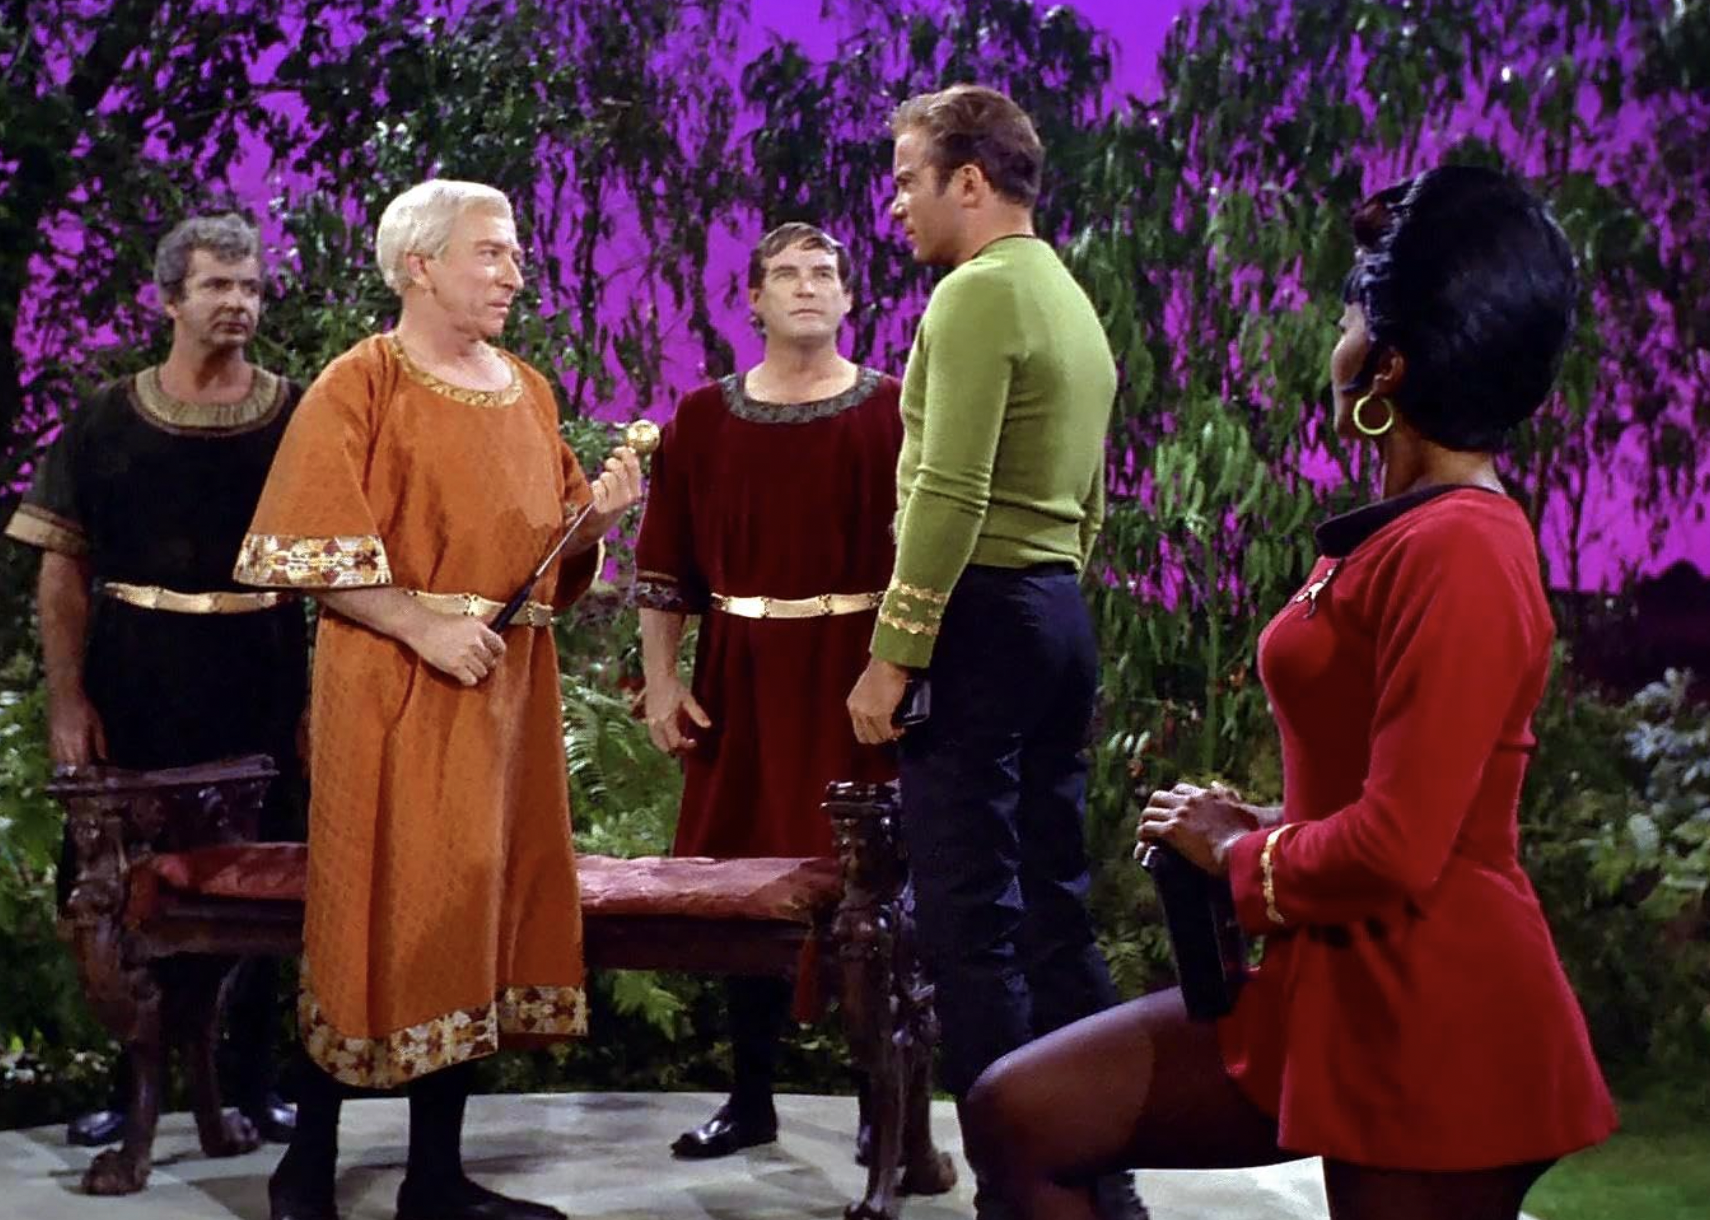 <p>- IMDb user rating: 9.0<br> - Season 2, Episode 4<br> - Director: Marc Daniels</p>  <p>Episode 4 of Season Two of "Star Trek" had the first look into another dimension within the lore, often referred to as the Mirror Universe. In this reality, the Federation is instead the Terran Empire, which is aggressive and militaristic in nature. The USS Enterprise is instead the ISS Enterprise, torture in the Agony Booth is the main form of discipline, and <a href="https://www.startrek.com/article/mirror-mirror-49-years-later">Mirror Spock famously fashions a goatee</a>. The Mirror Universe has become a mainstay in most "Star Trek" shows, and the use of a beard to signify an evil doppelganger is an <a href="https://tvtropes.org/pmwiki/pmwiki.php/Main/BeardOfEvil">often used and parodied trope</a>.</p>